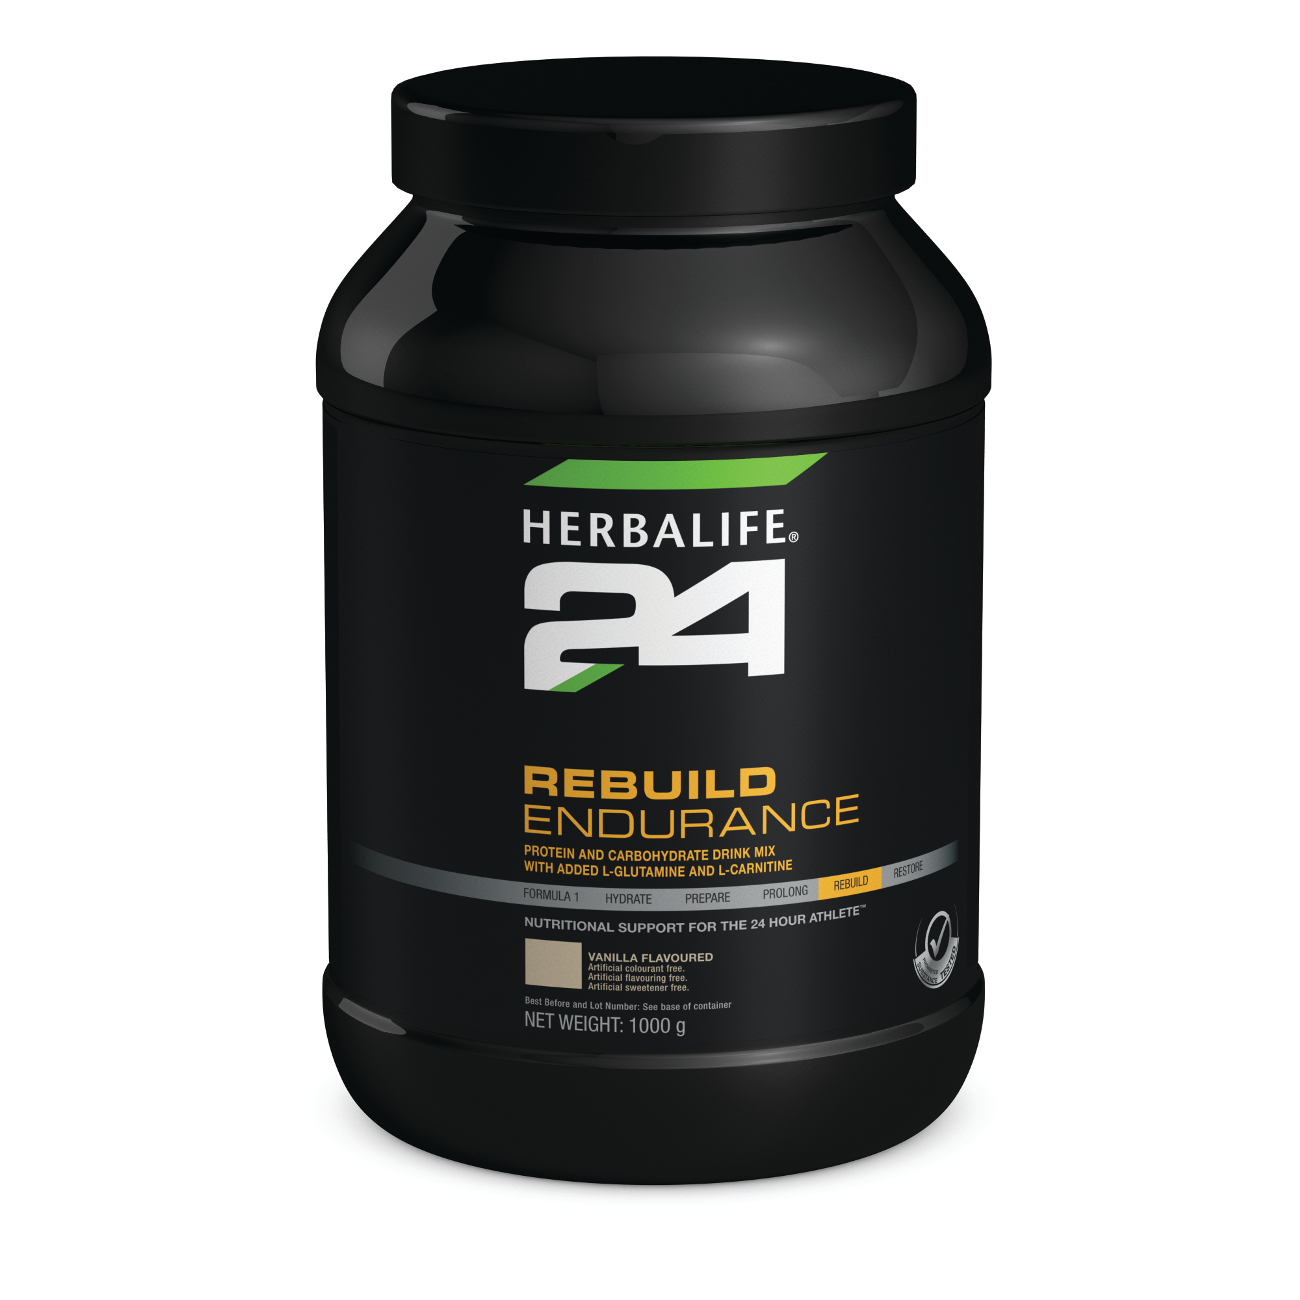 Herbalife24® Rebuild Endurance Protein-Carbohydrate Drink Mix Vanilla Flavoured product shot